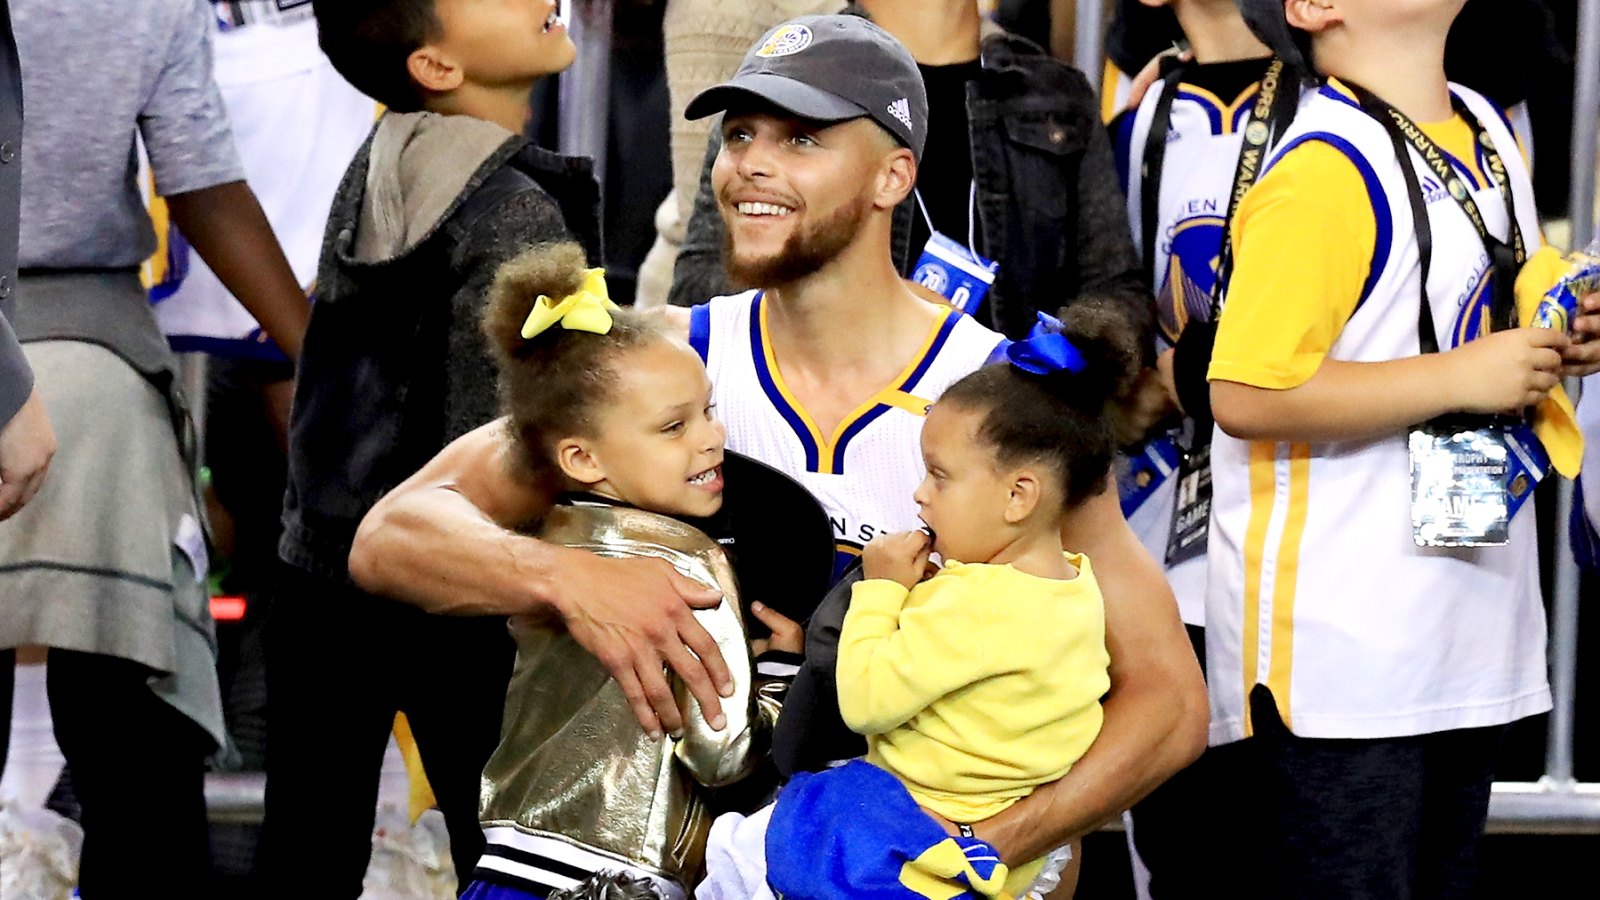 Stephen Curry #30 of the Golden State Warriors celebrates holding his daughters Riley and Ryan after defeating the Cleveland Cavaliers 129-120 in Game 5 to win the 2017 NBA Finals at ORACLE Arena on June 12, 2017 in Oakland, California.